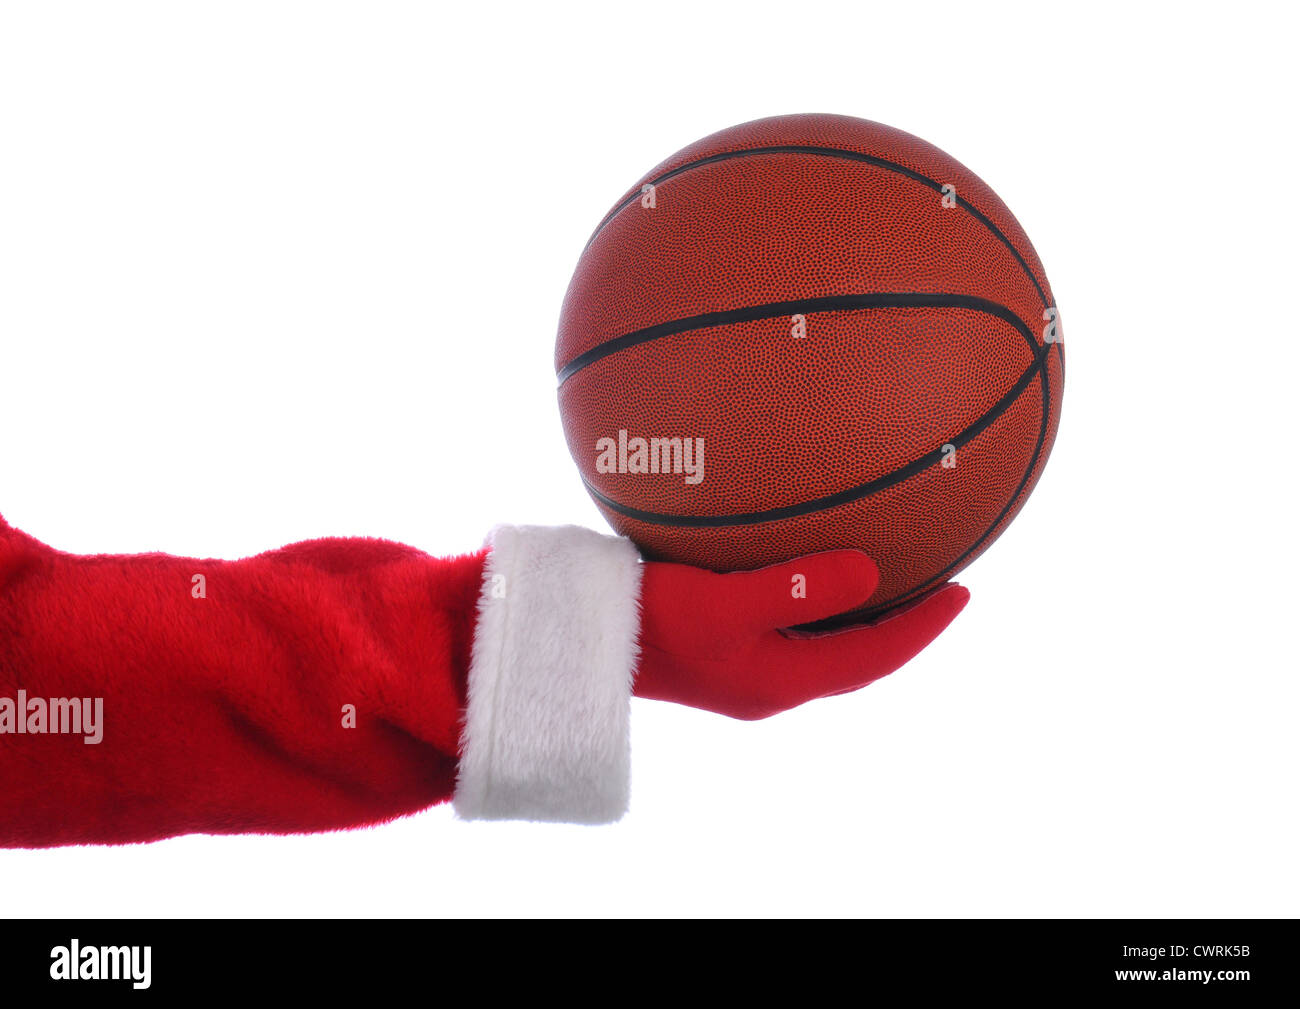 Santa Claus outstretched arm holding a Basketball. Horizontal format over a white background. Stock Photo